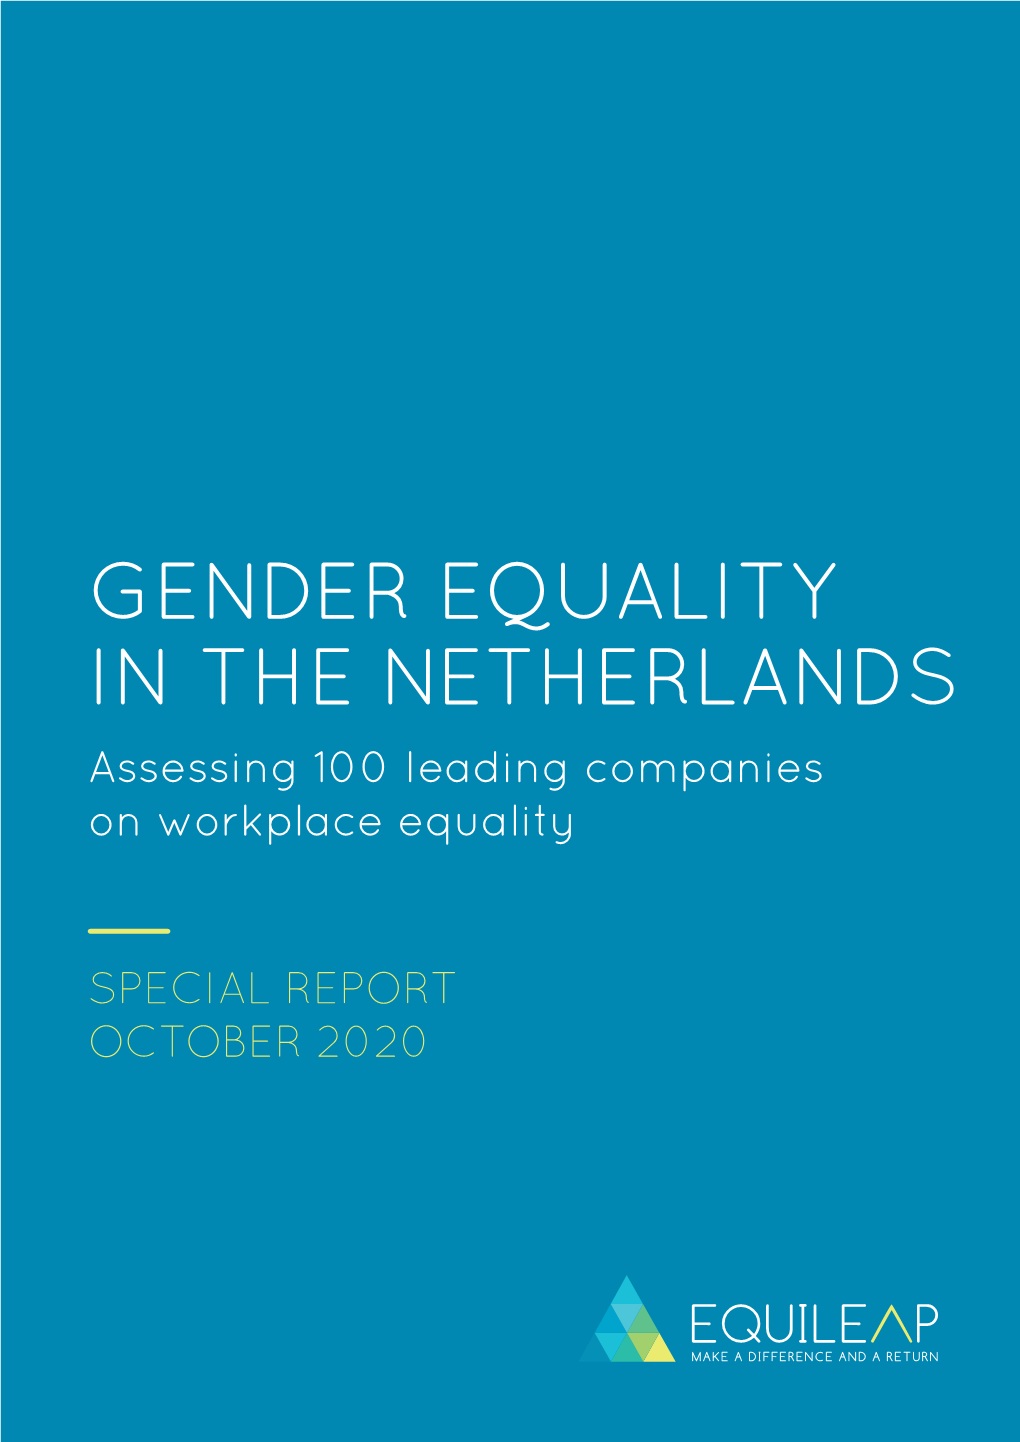 GENDER EQUALITY in the NETHERLANDS Assessing 100 Leading Companies on Workplace Equality